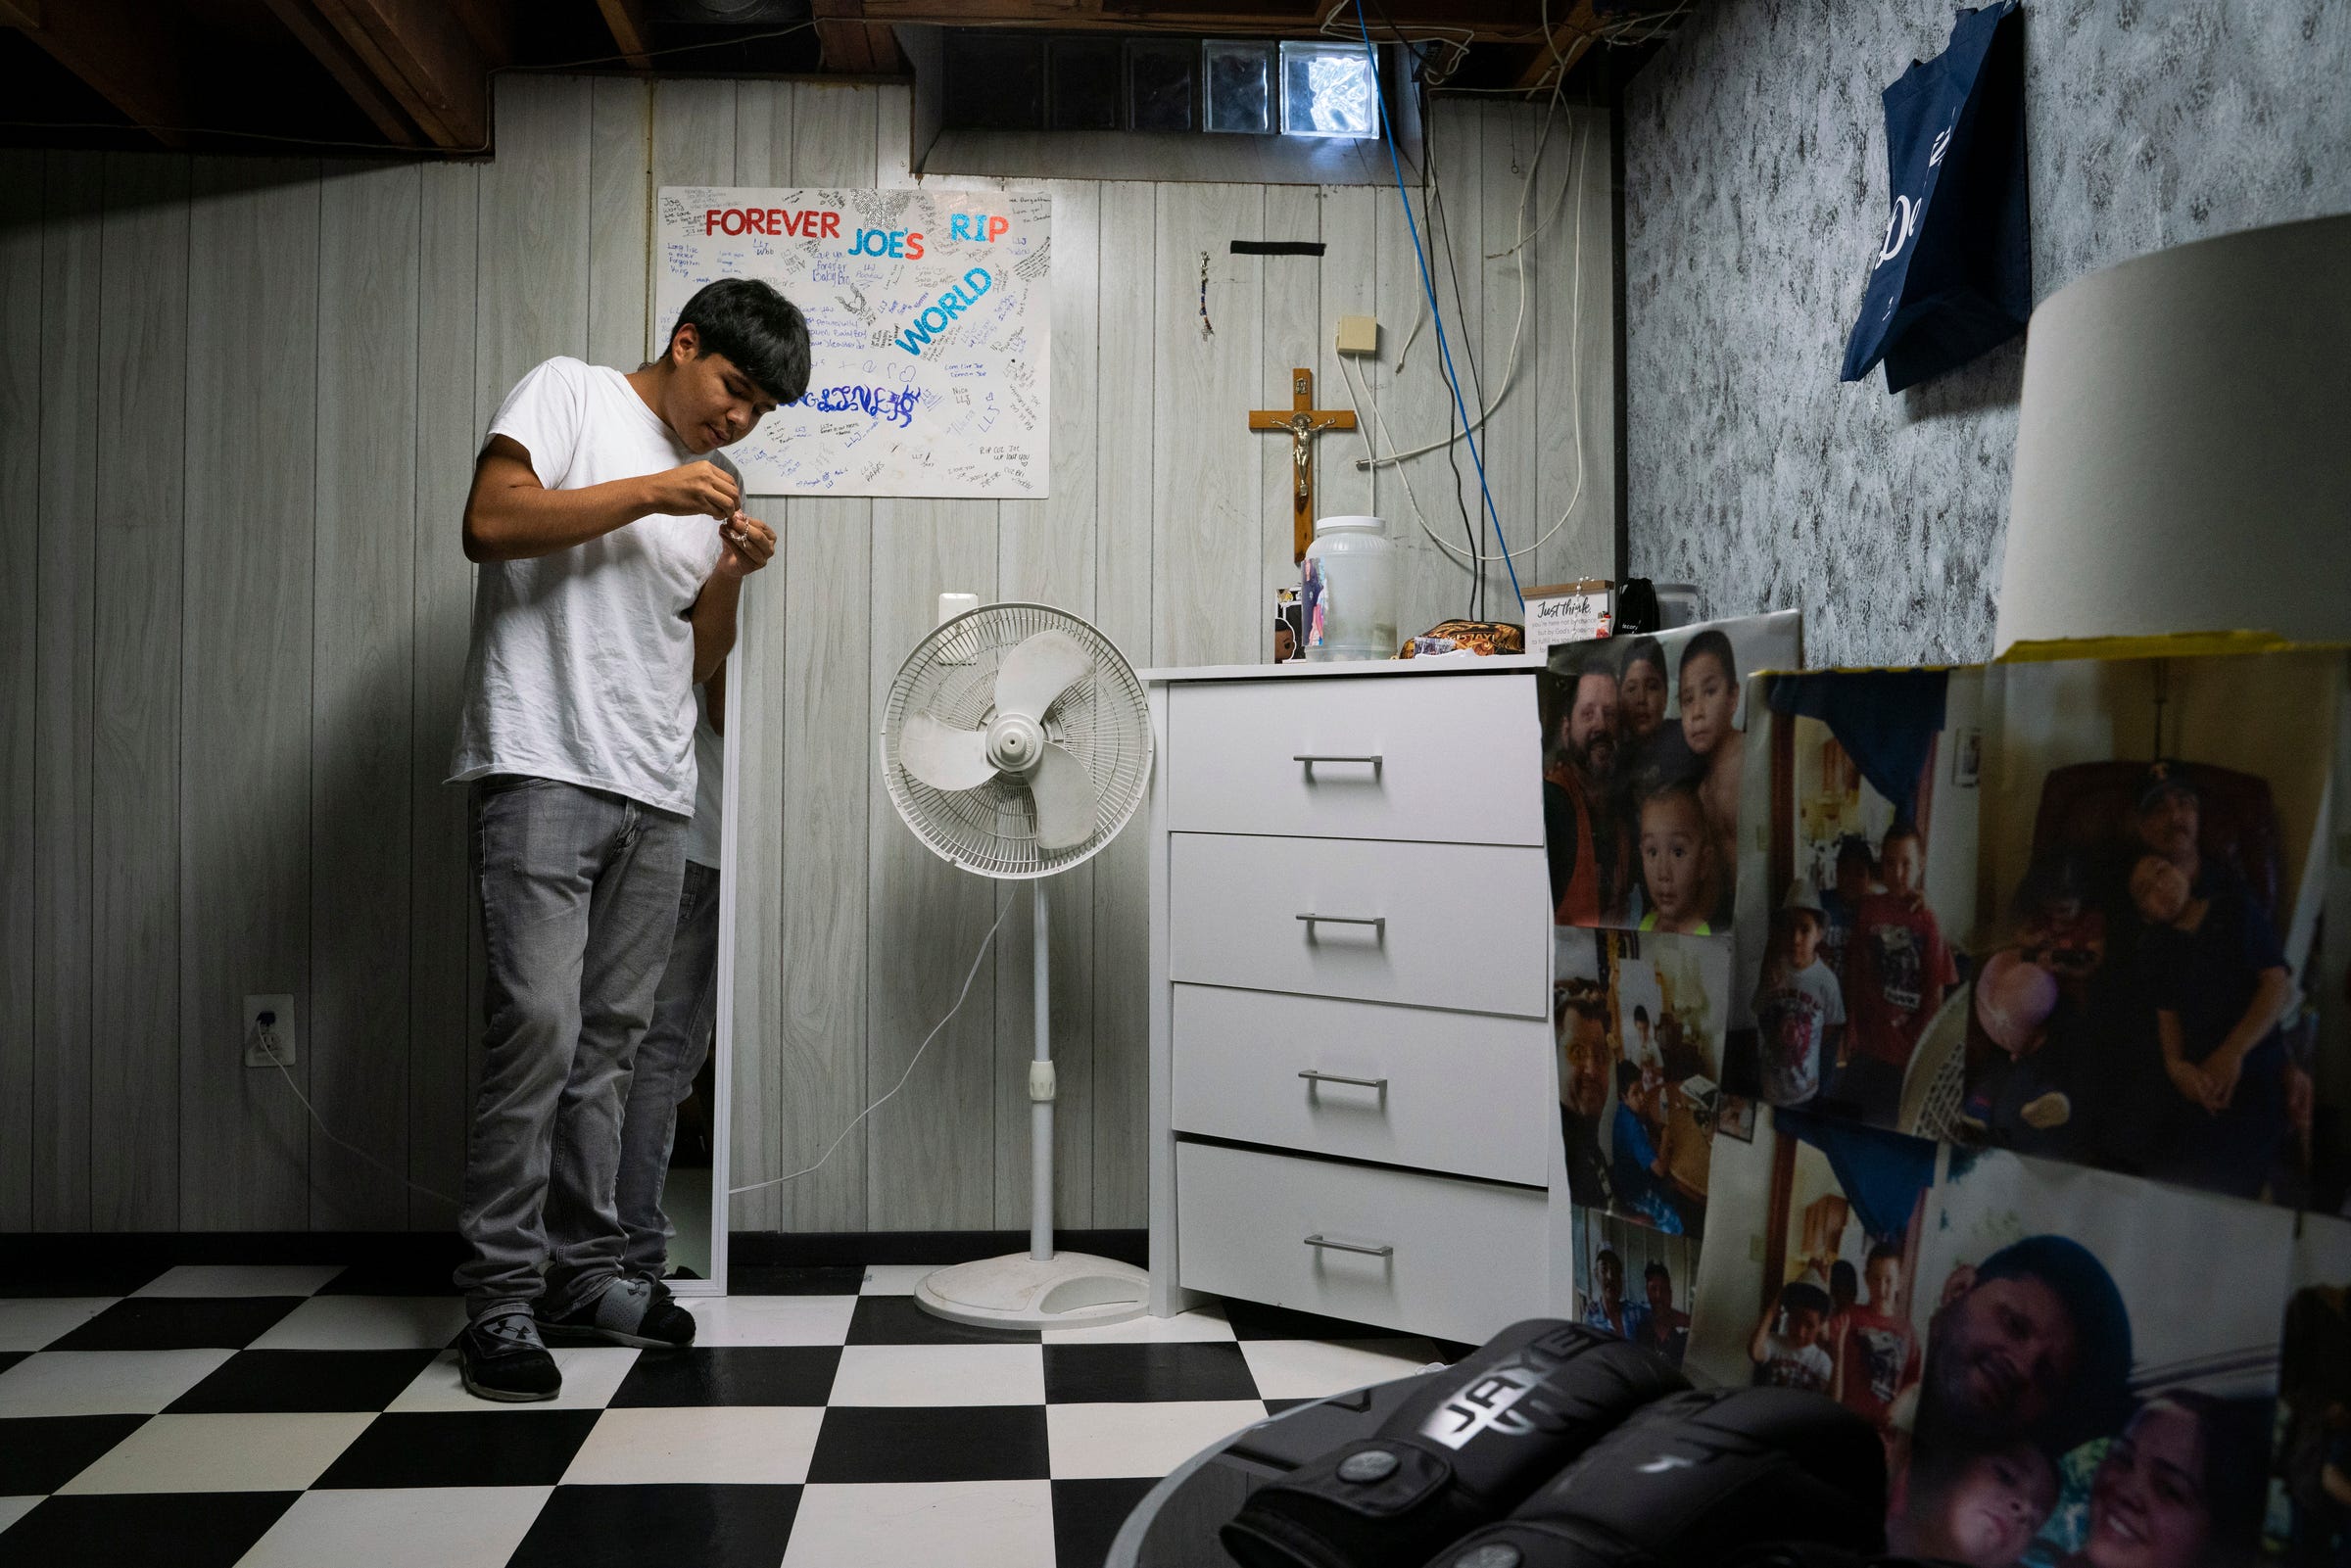 Justin Nankervis, 16, looks at a rosary while standing inside his room at his sister's home on Wednesday, Oct. 5, 2022. "That was my right-hand man. That was my baby brother," said Nankervis, whose younger brother, Joe Nankervis, 14, was shot and killed in southwest Detroit. "We were always together. We did everything together."
(Photo: Sarahbeth Maney, Detroit Free Press)